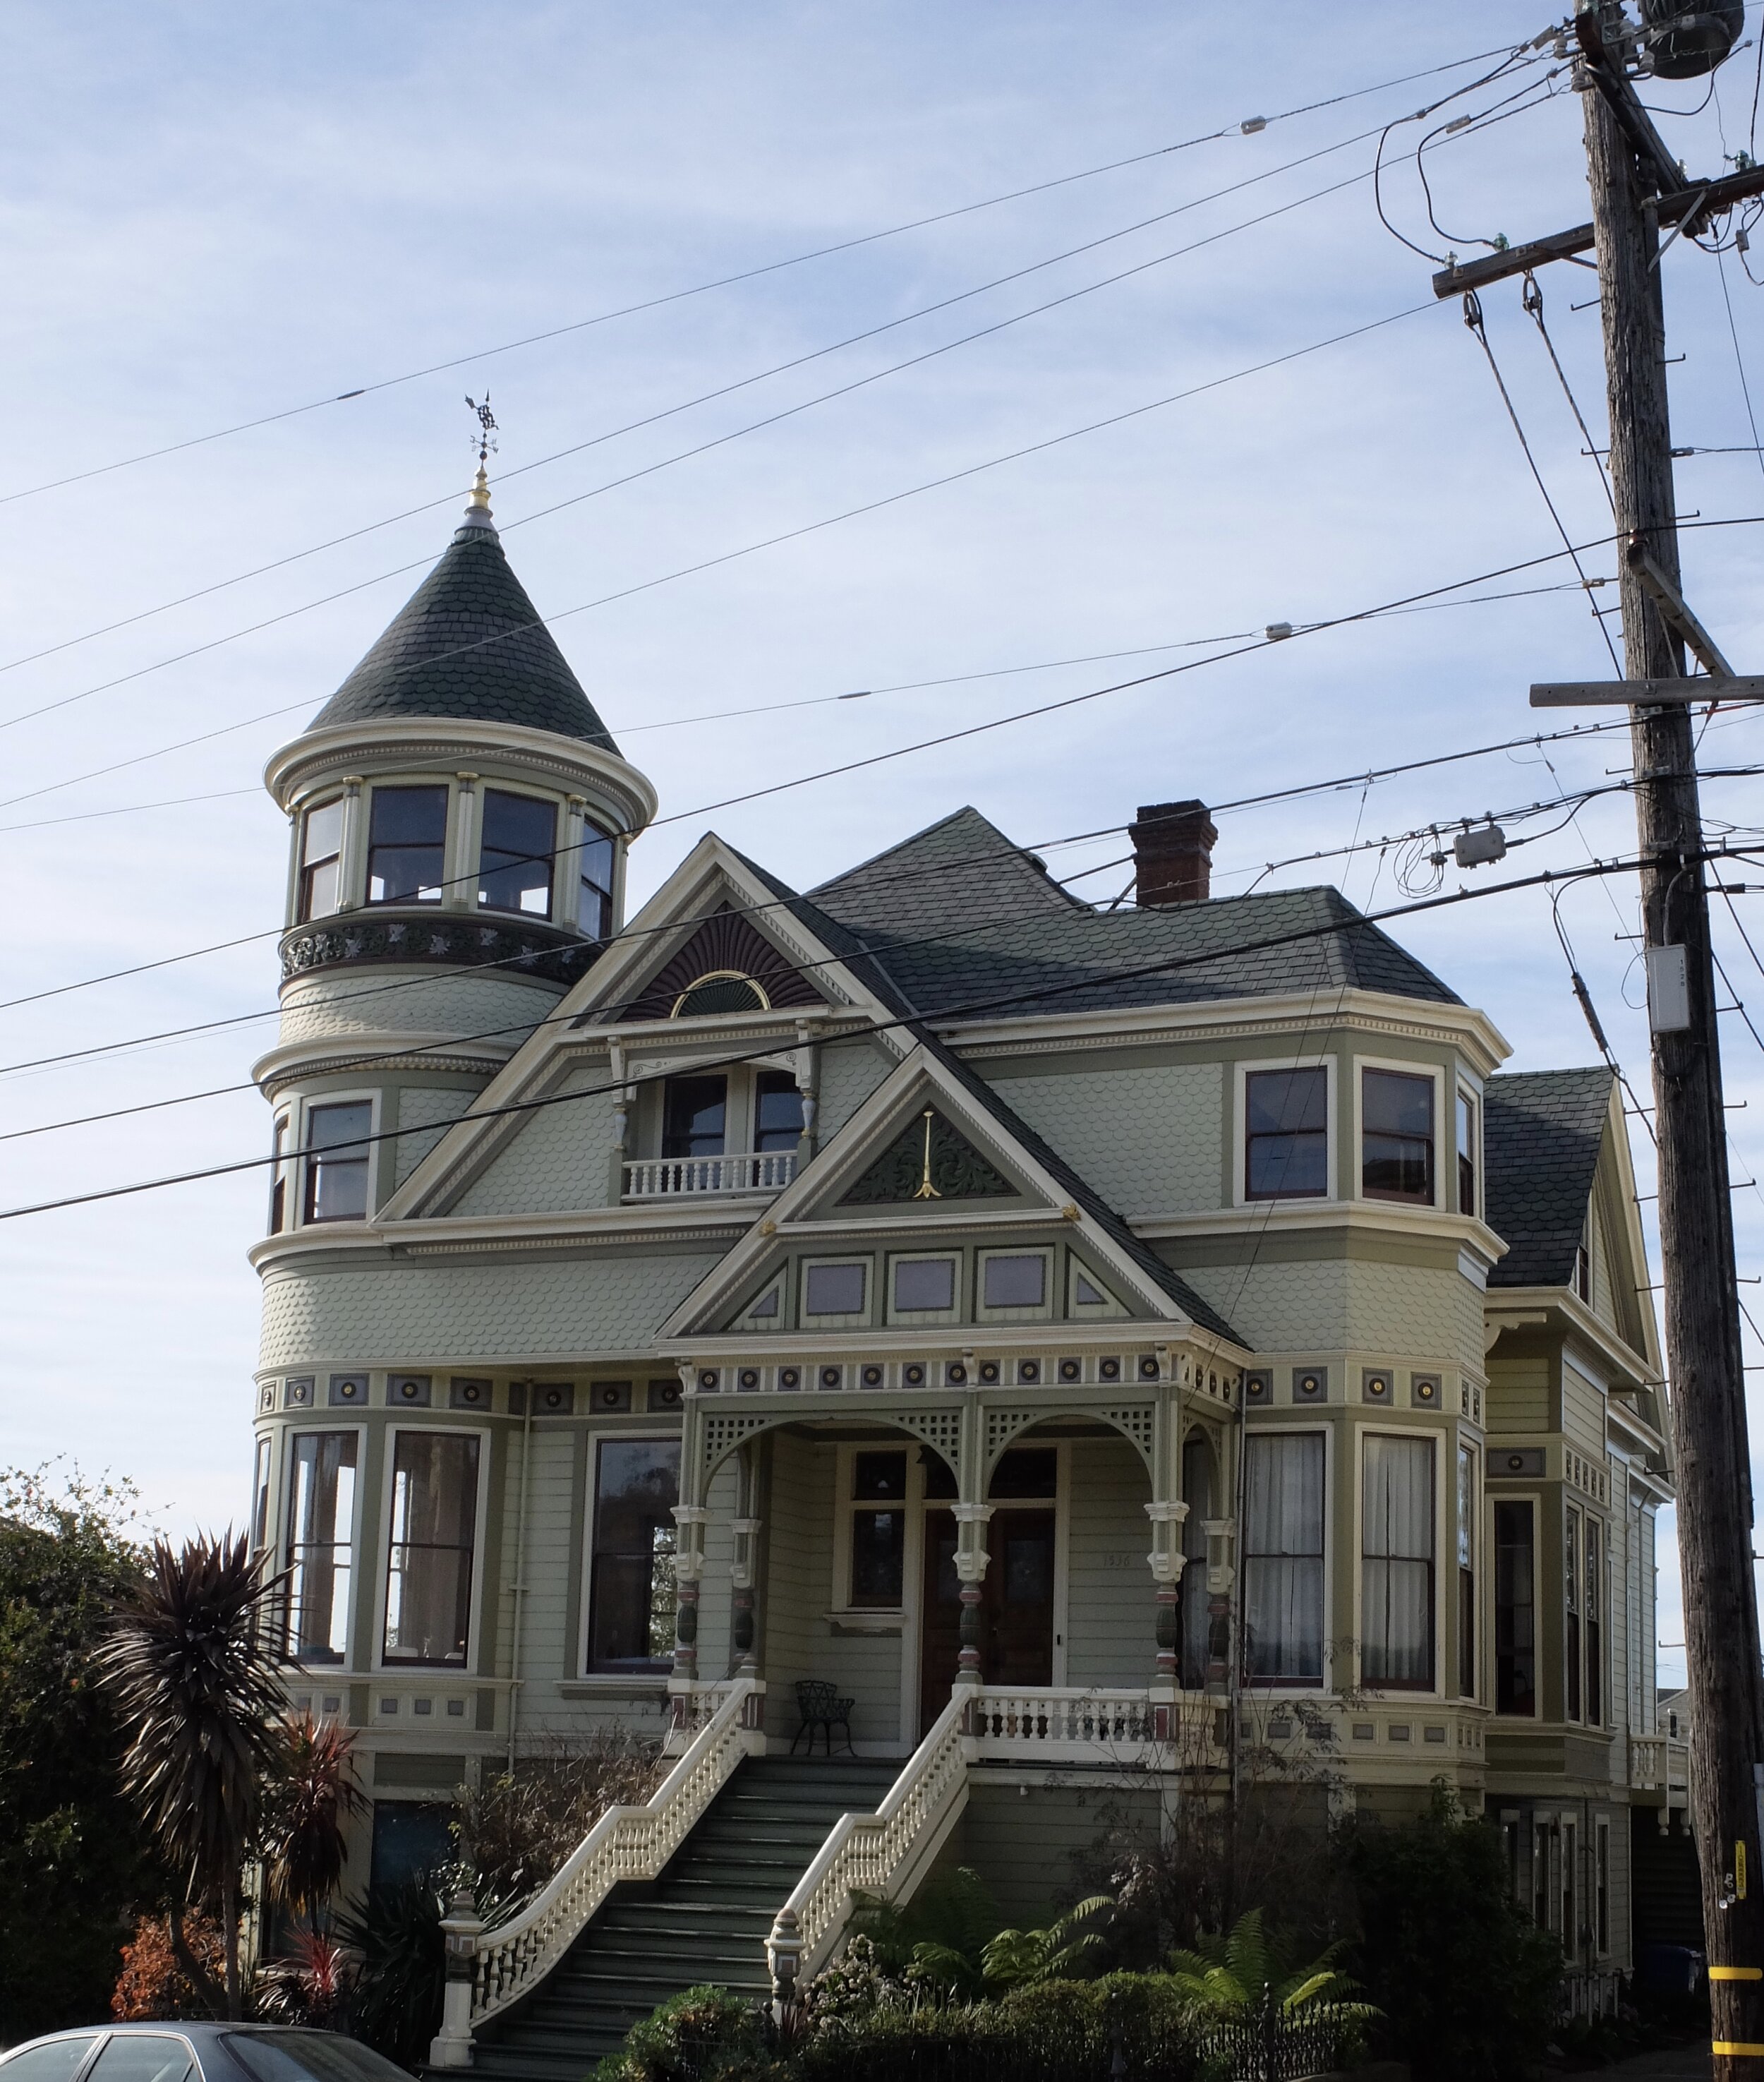  One of the most imposing Victorian-era homes in Berkeley, the c. 1889 Julius Kraft Queen East-Lake style Boudrow House is now a residence for visiting scholars.  It was built for master mariner Boudrow  when Berkeley, whose population then numbered 